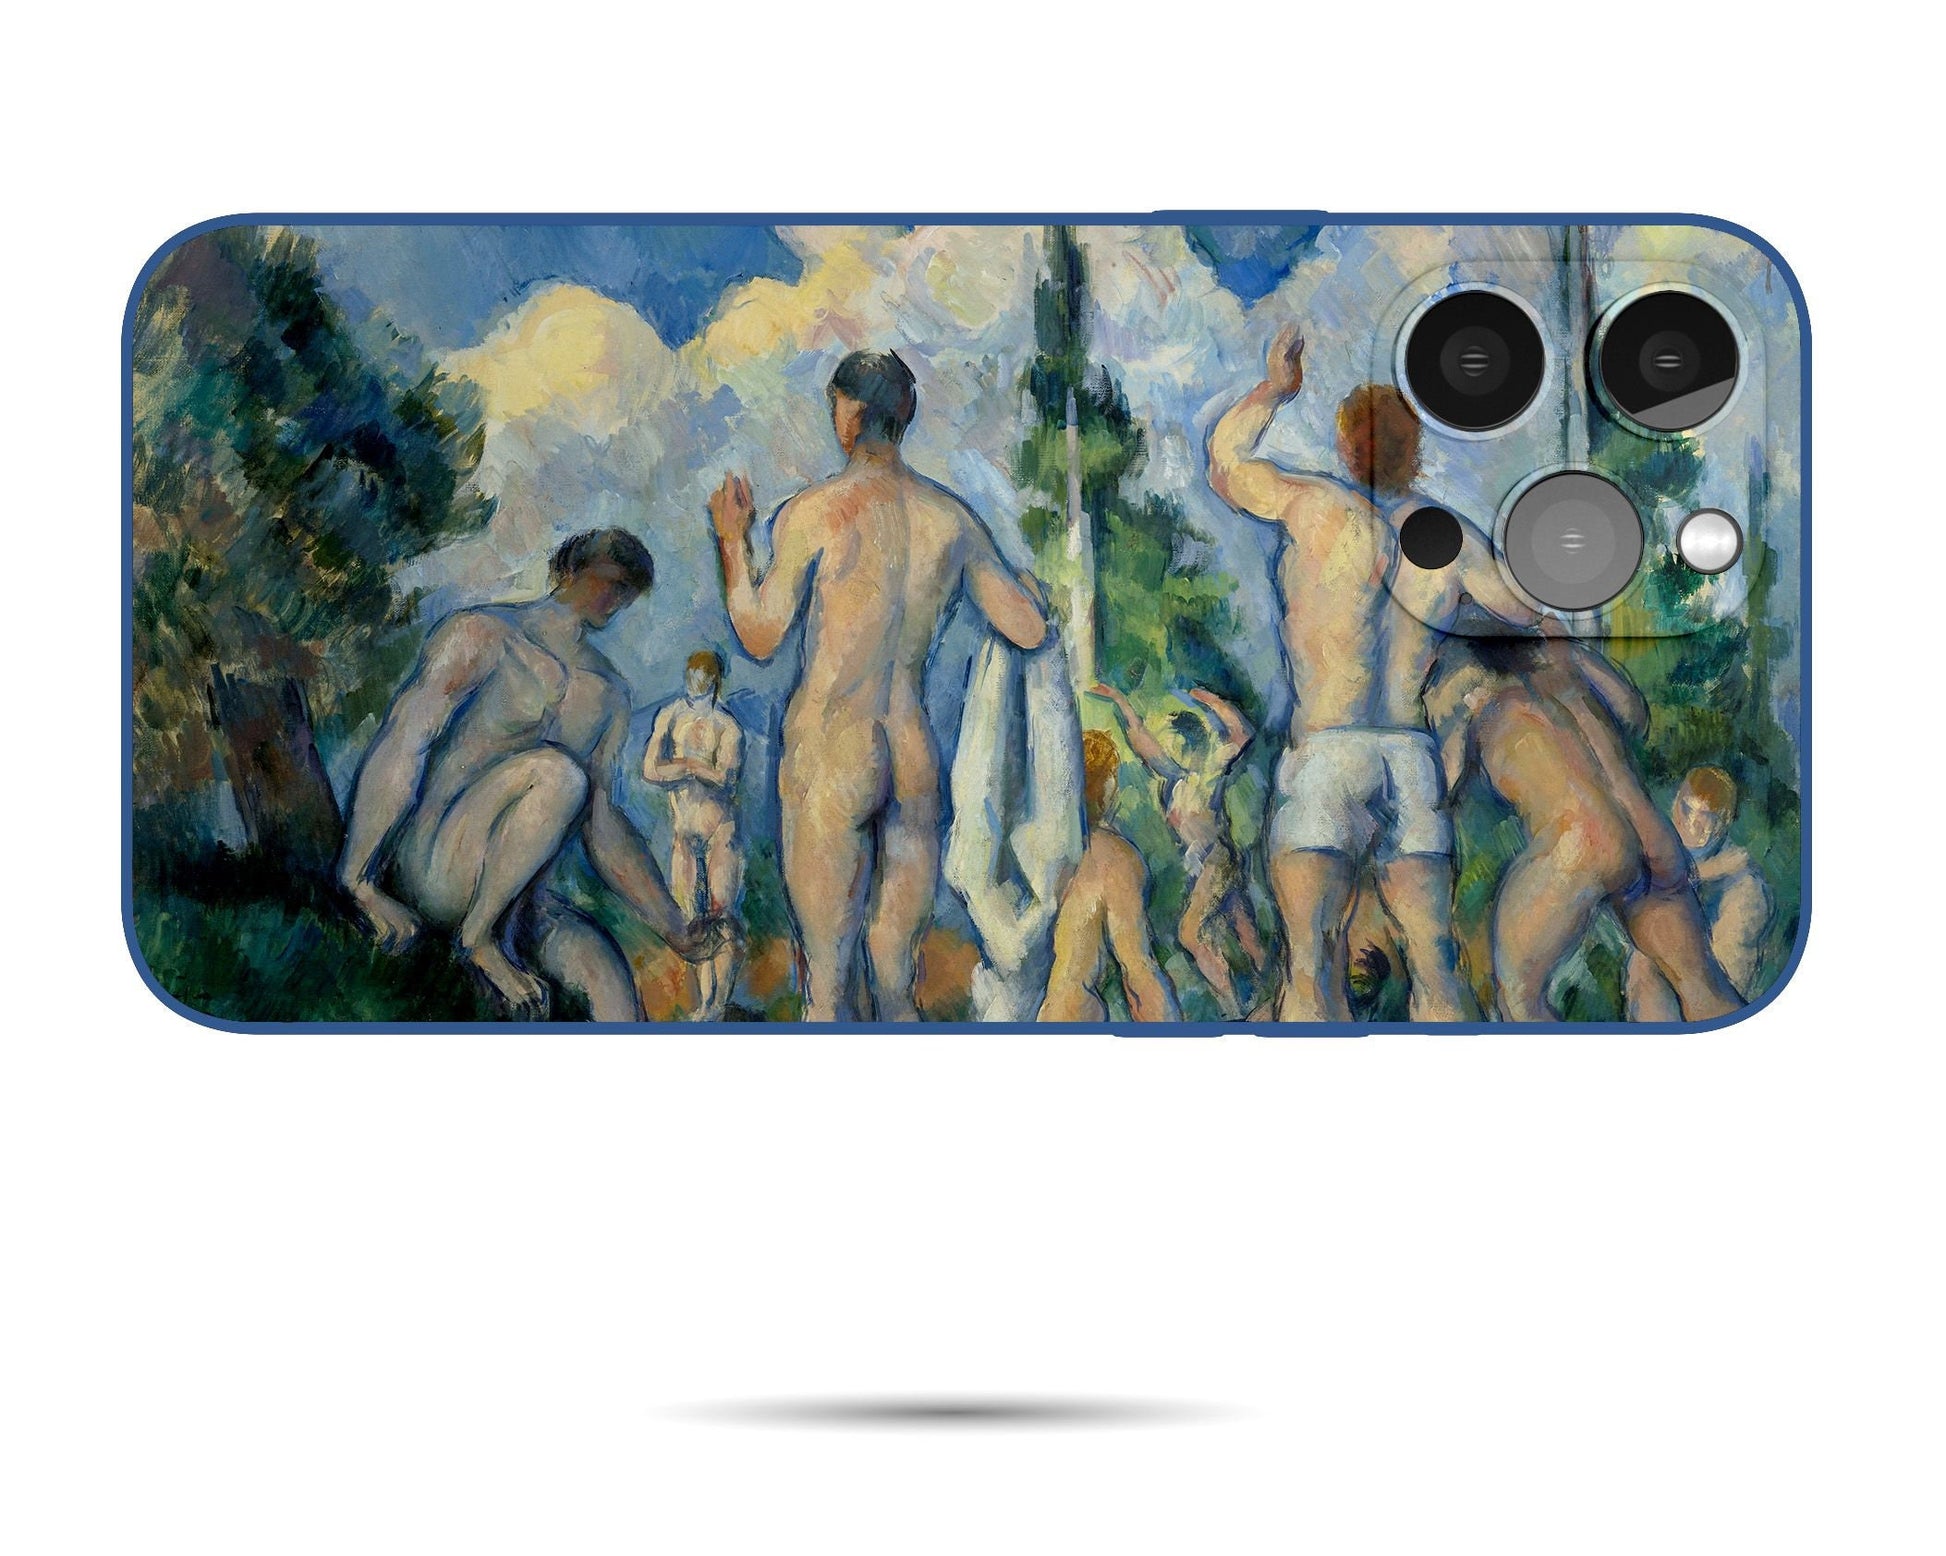 Iphone Case Of Paul Cézanne Famous painting Large Bathers, Iphone 11 Case, Iphone Xs, Aesthetic Phone Case, Birthday Gift, Iphone Case Matte